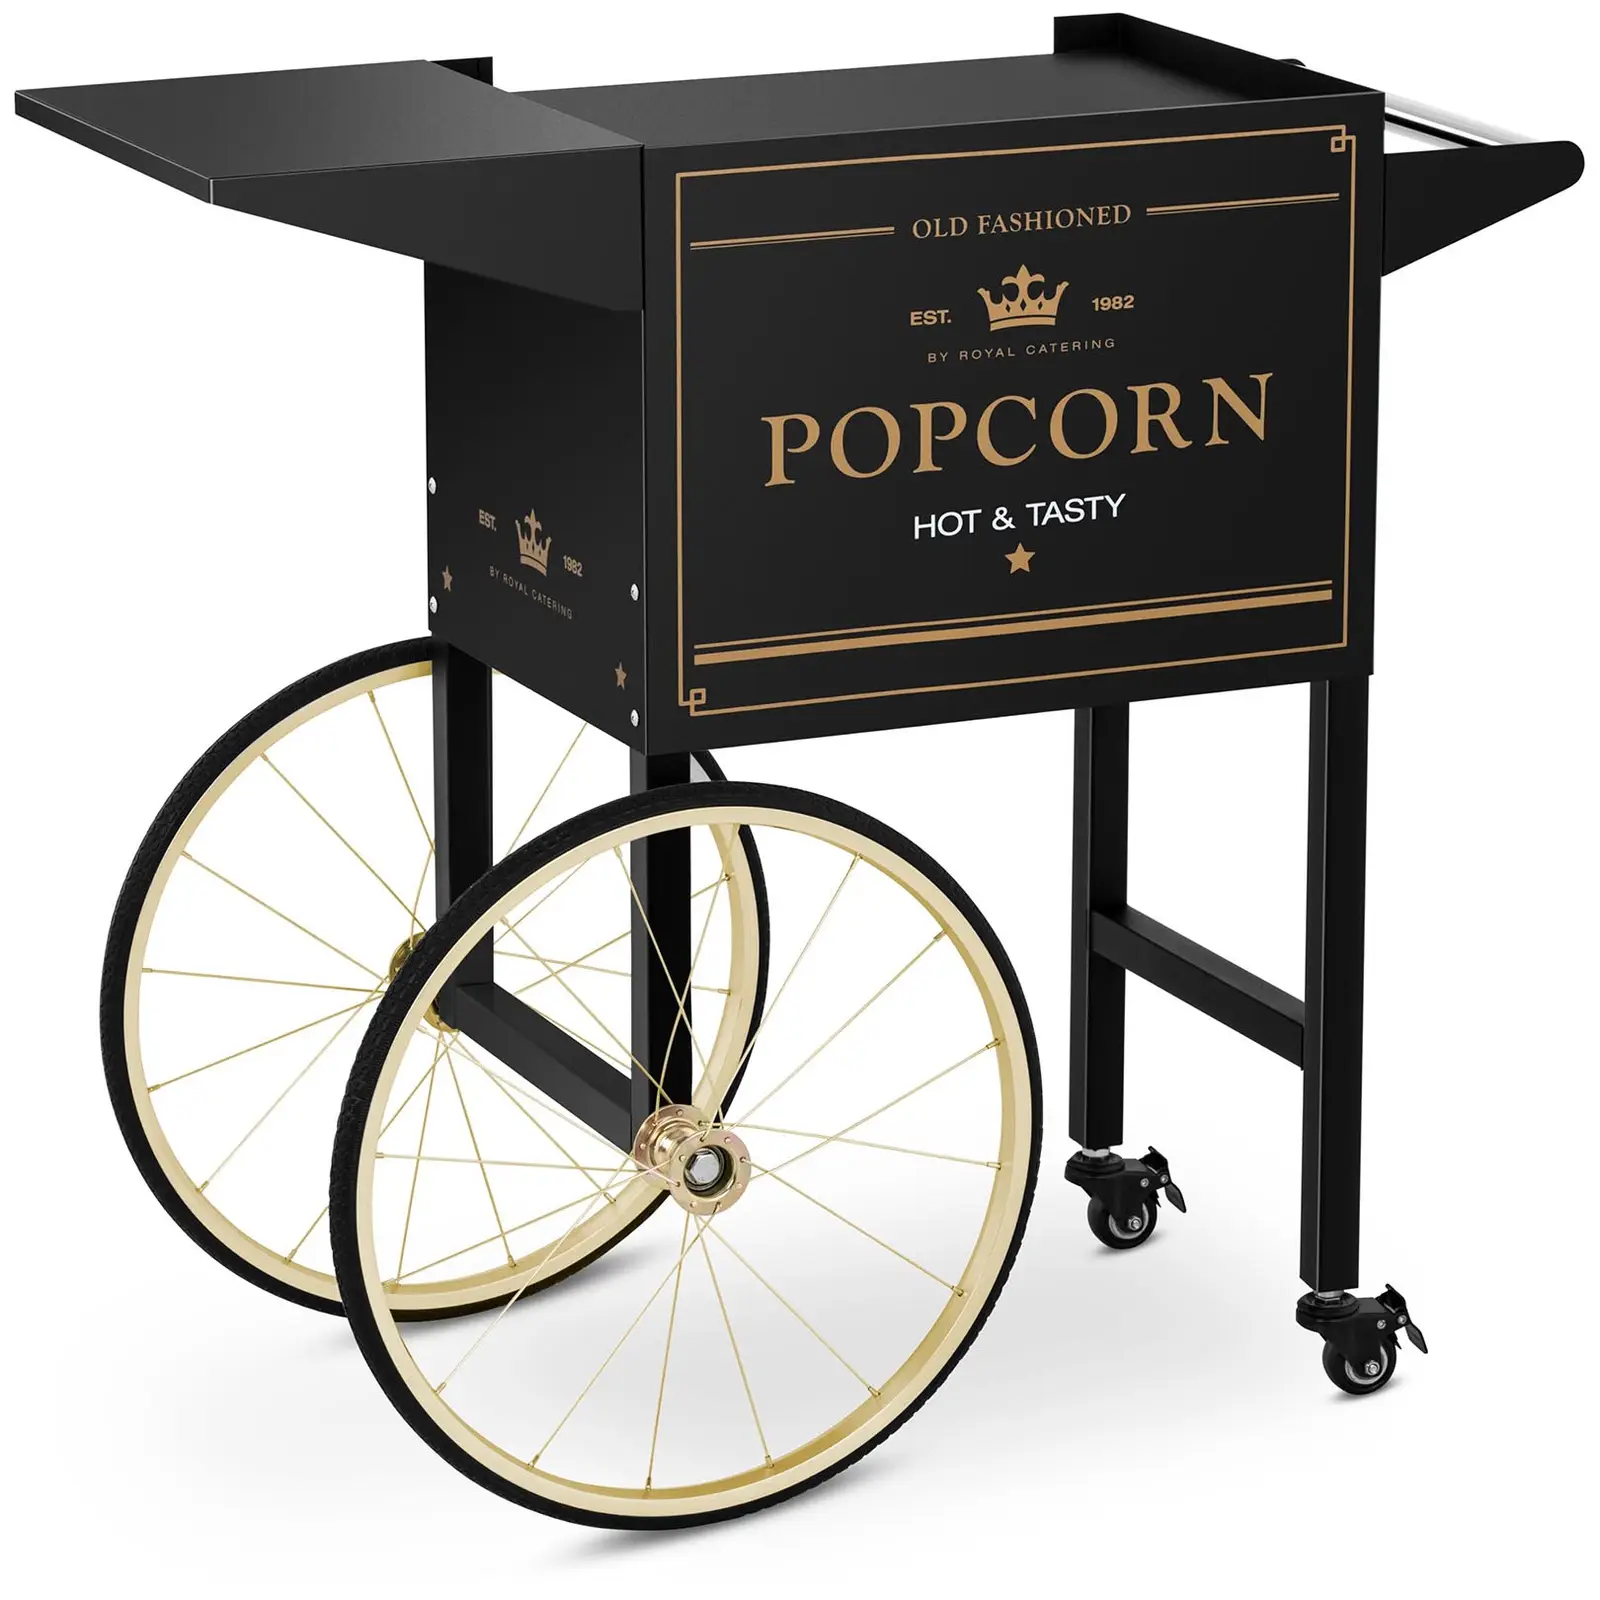 Popcorn trolley - black and gold